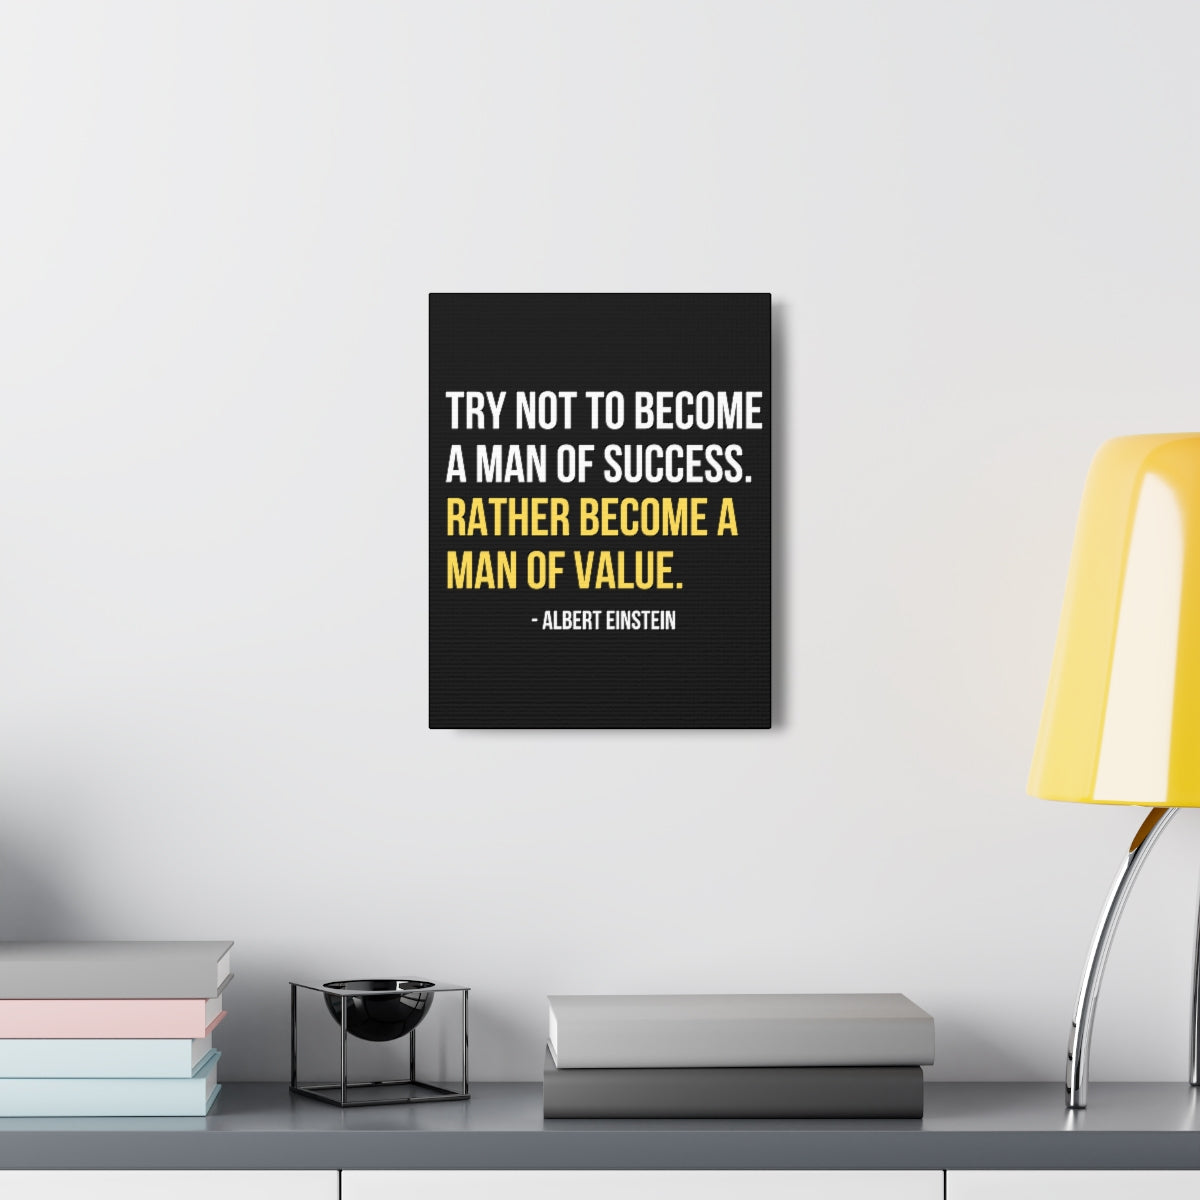 Scripture Walls Inspirational Wall Art A Man Of Value Motivation Wall Decor for Home Office Gym Inspiring Success Quote Print Ready to Hang Unframed-Express Your Love Gifts